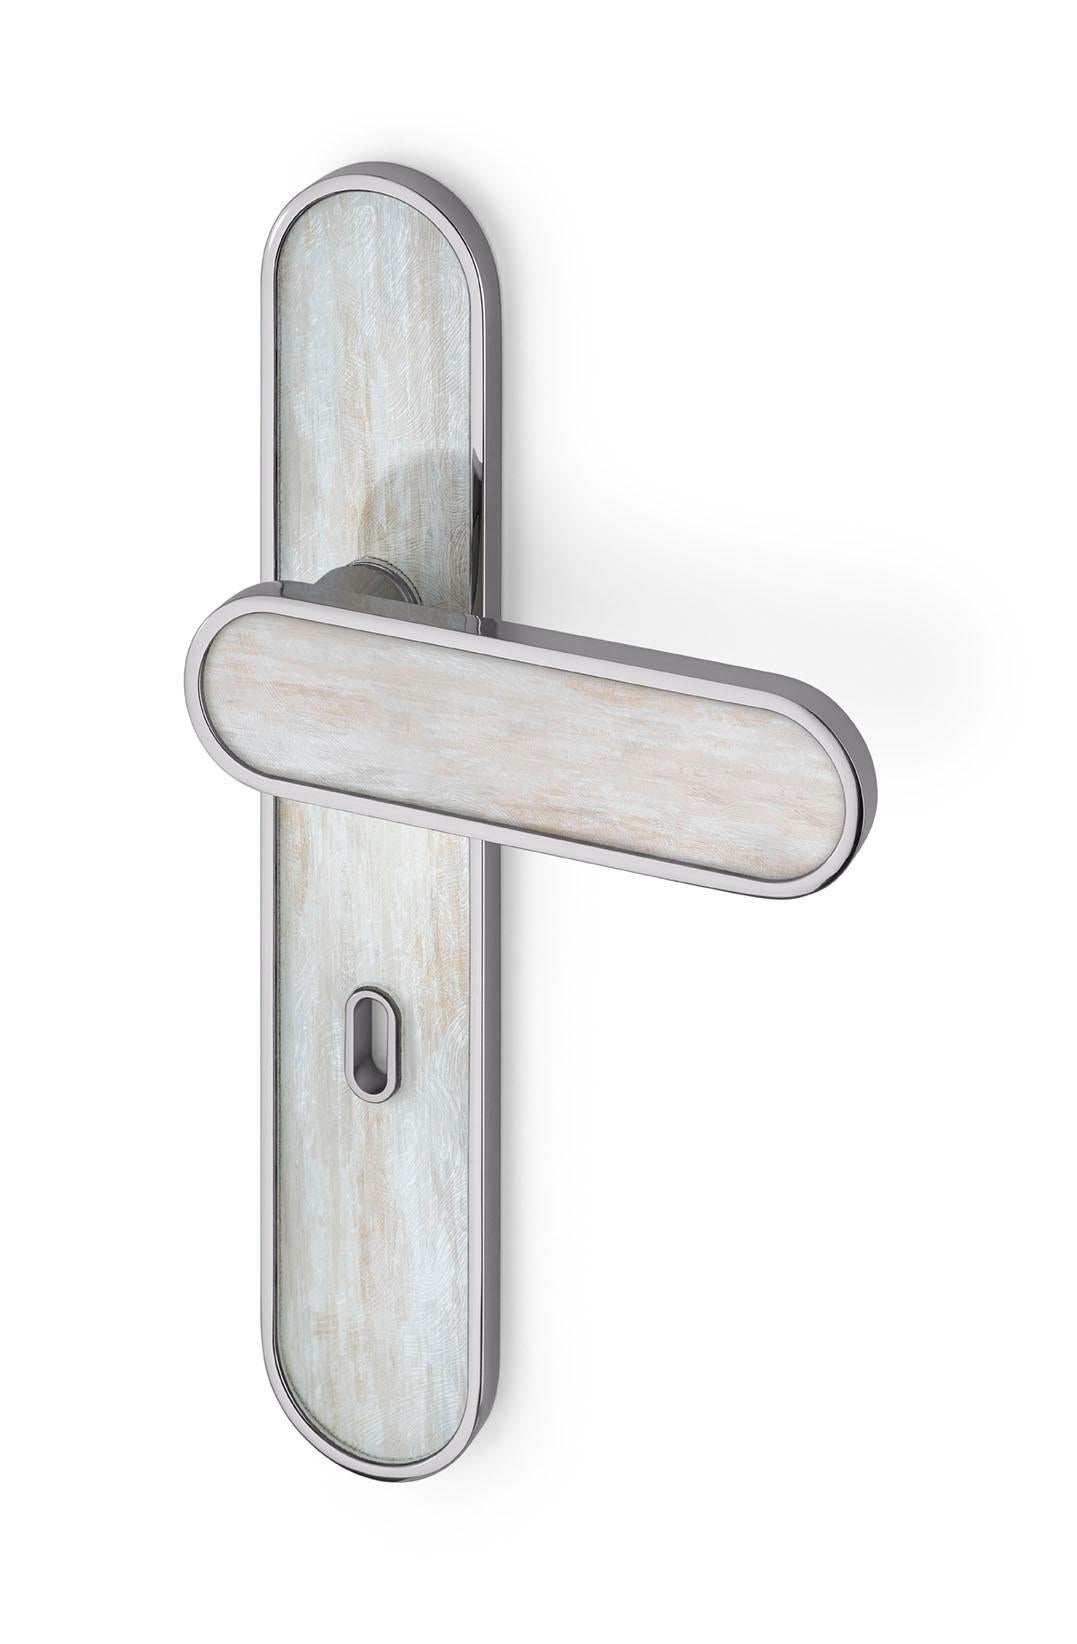 Door Handle Aluminum Plate Brass Handle Body Polished Chrome Finished Vetrite In New Condition For Sale In London, GB